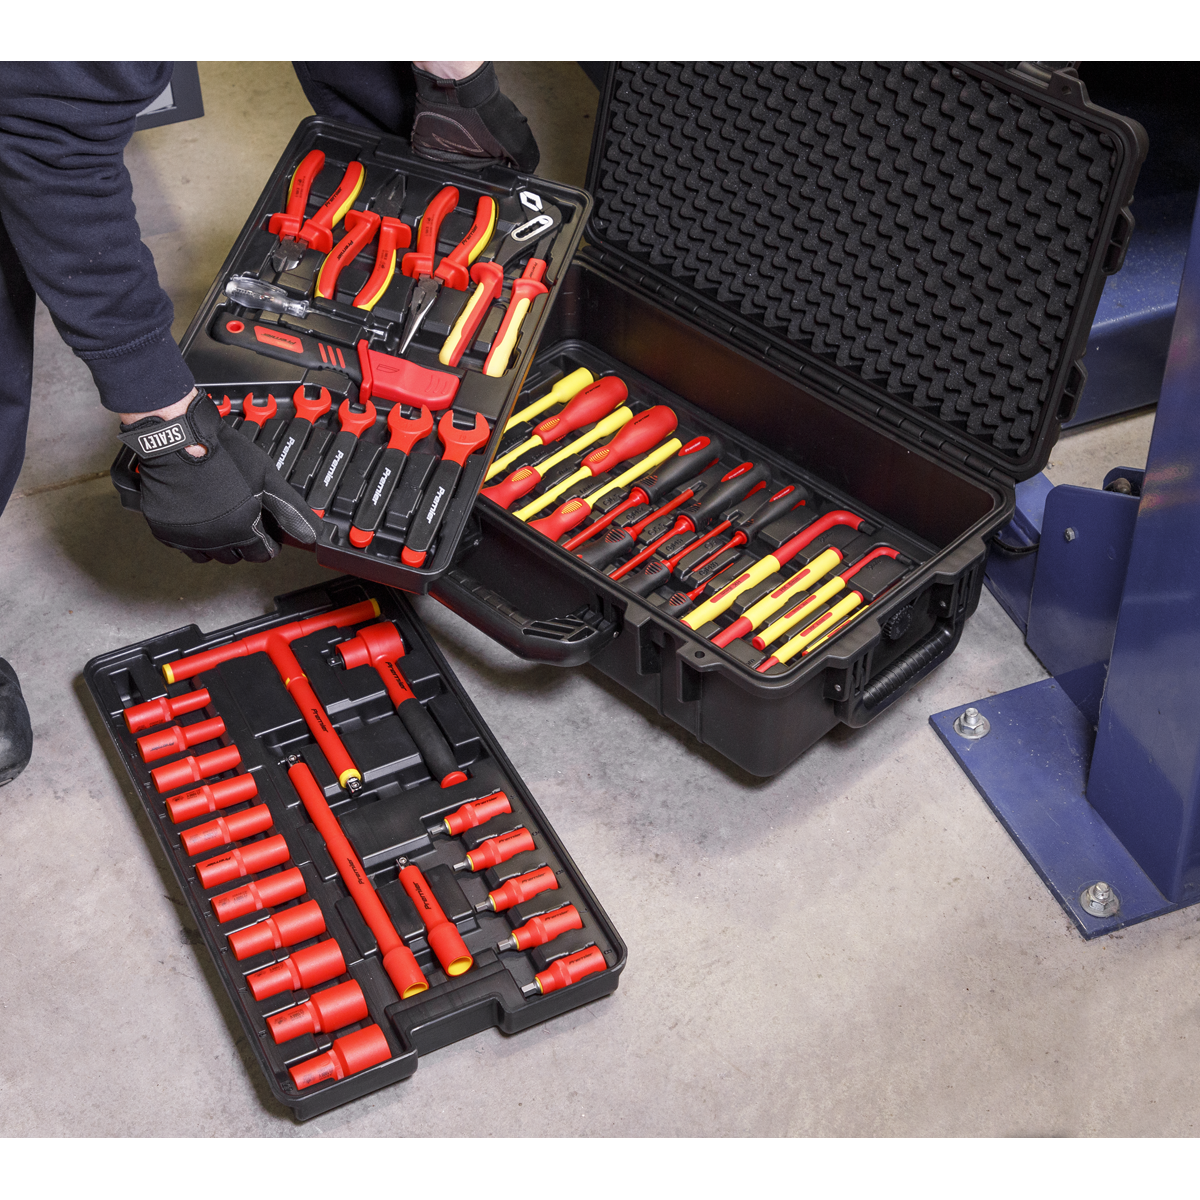 Sealey 50pc 3/8"Sq Drive 1000V Insulated Tool Kit AK7938